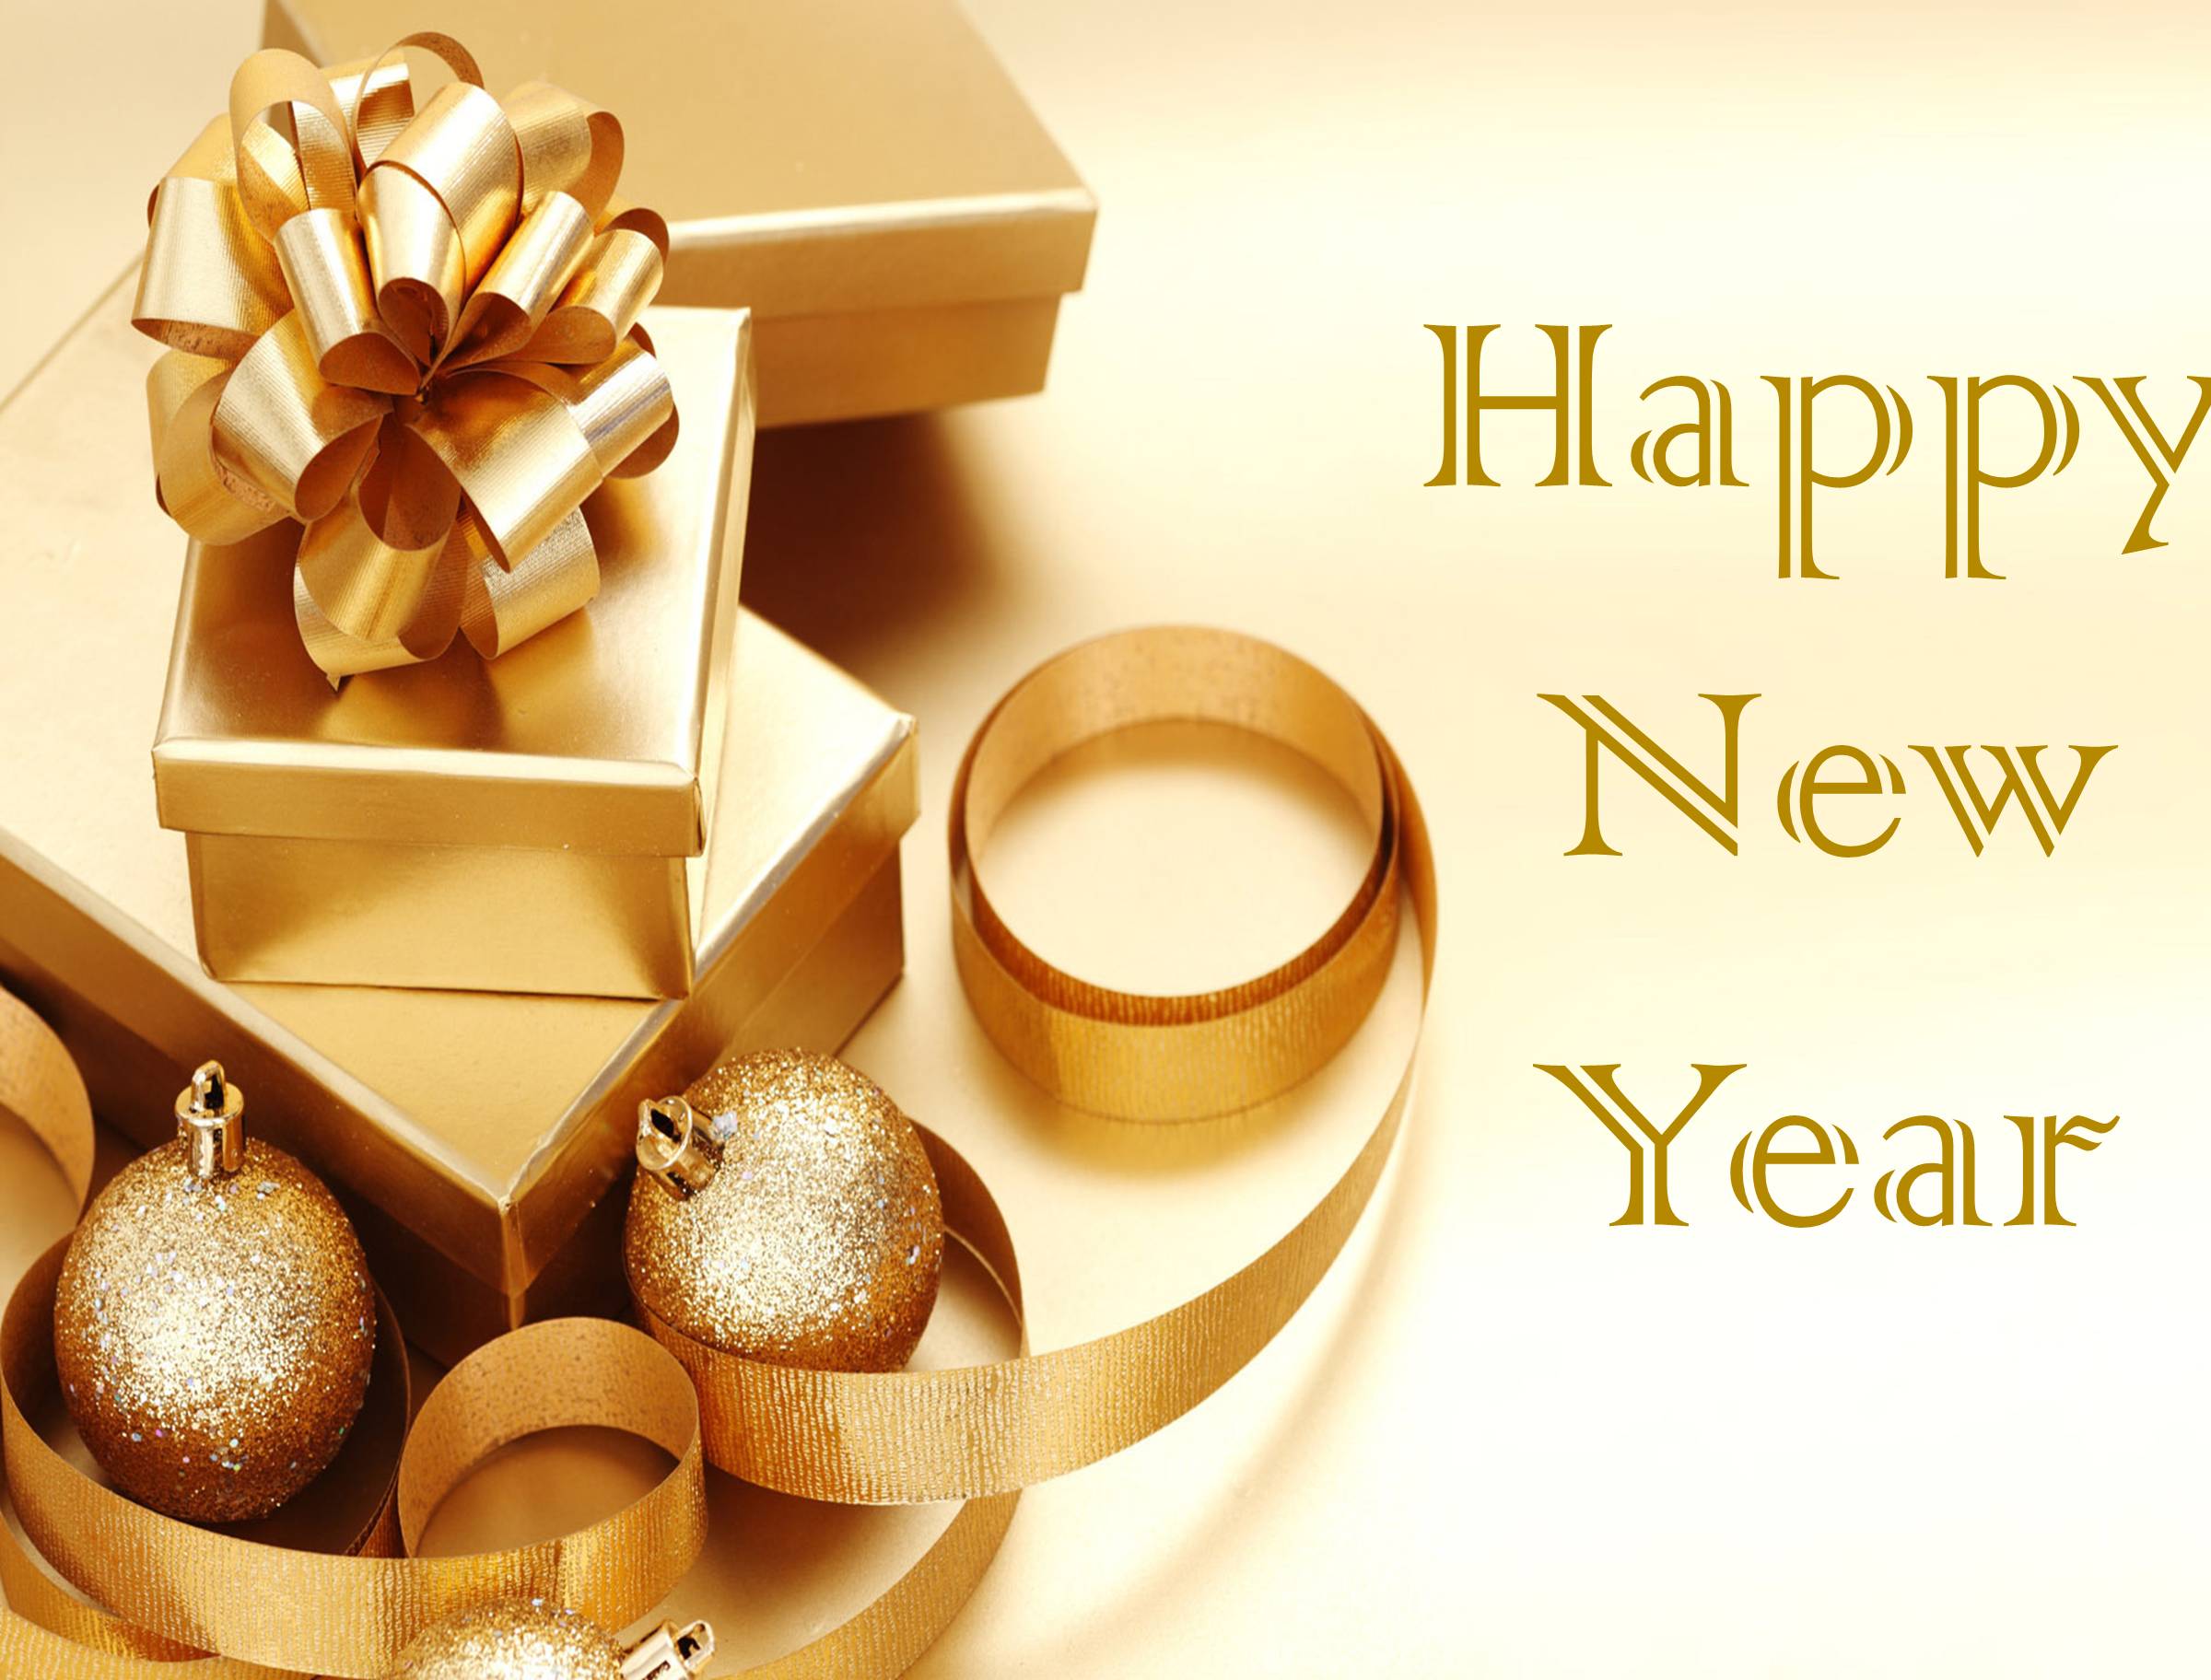 Happy New Year Wallpaper HD Image Chainimage